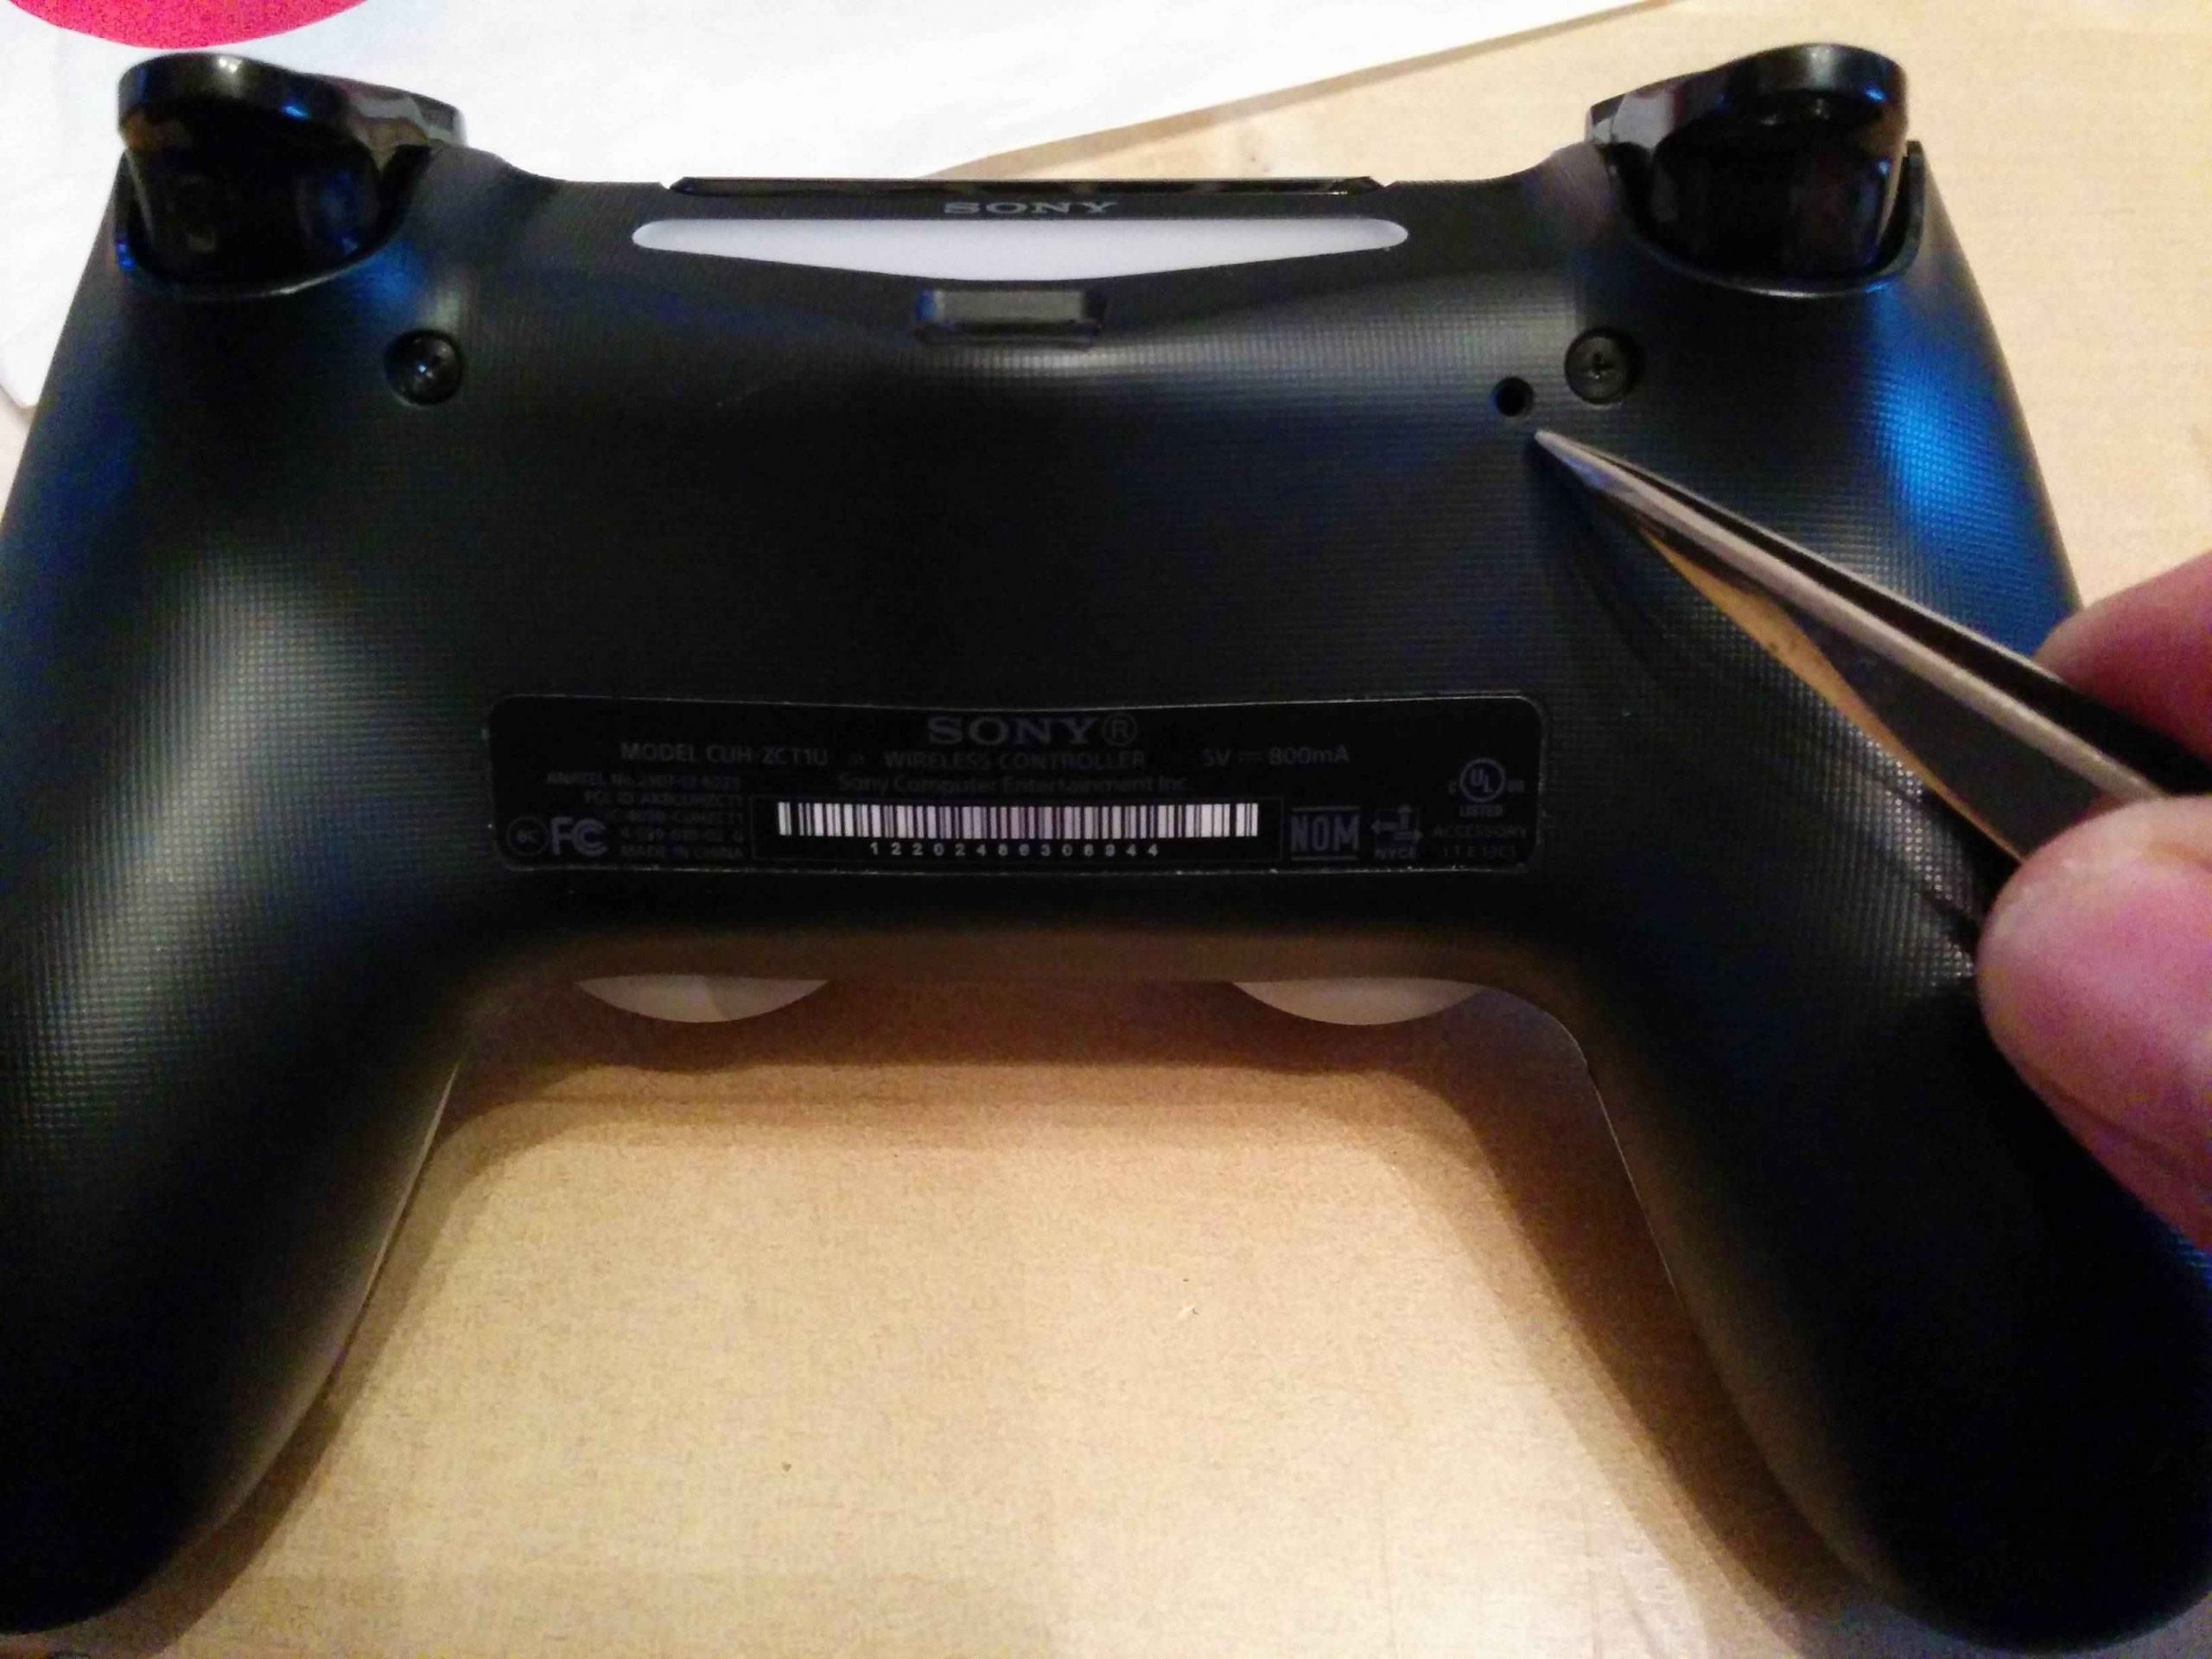  press the reset button to reset the PS3 Controller